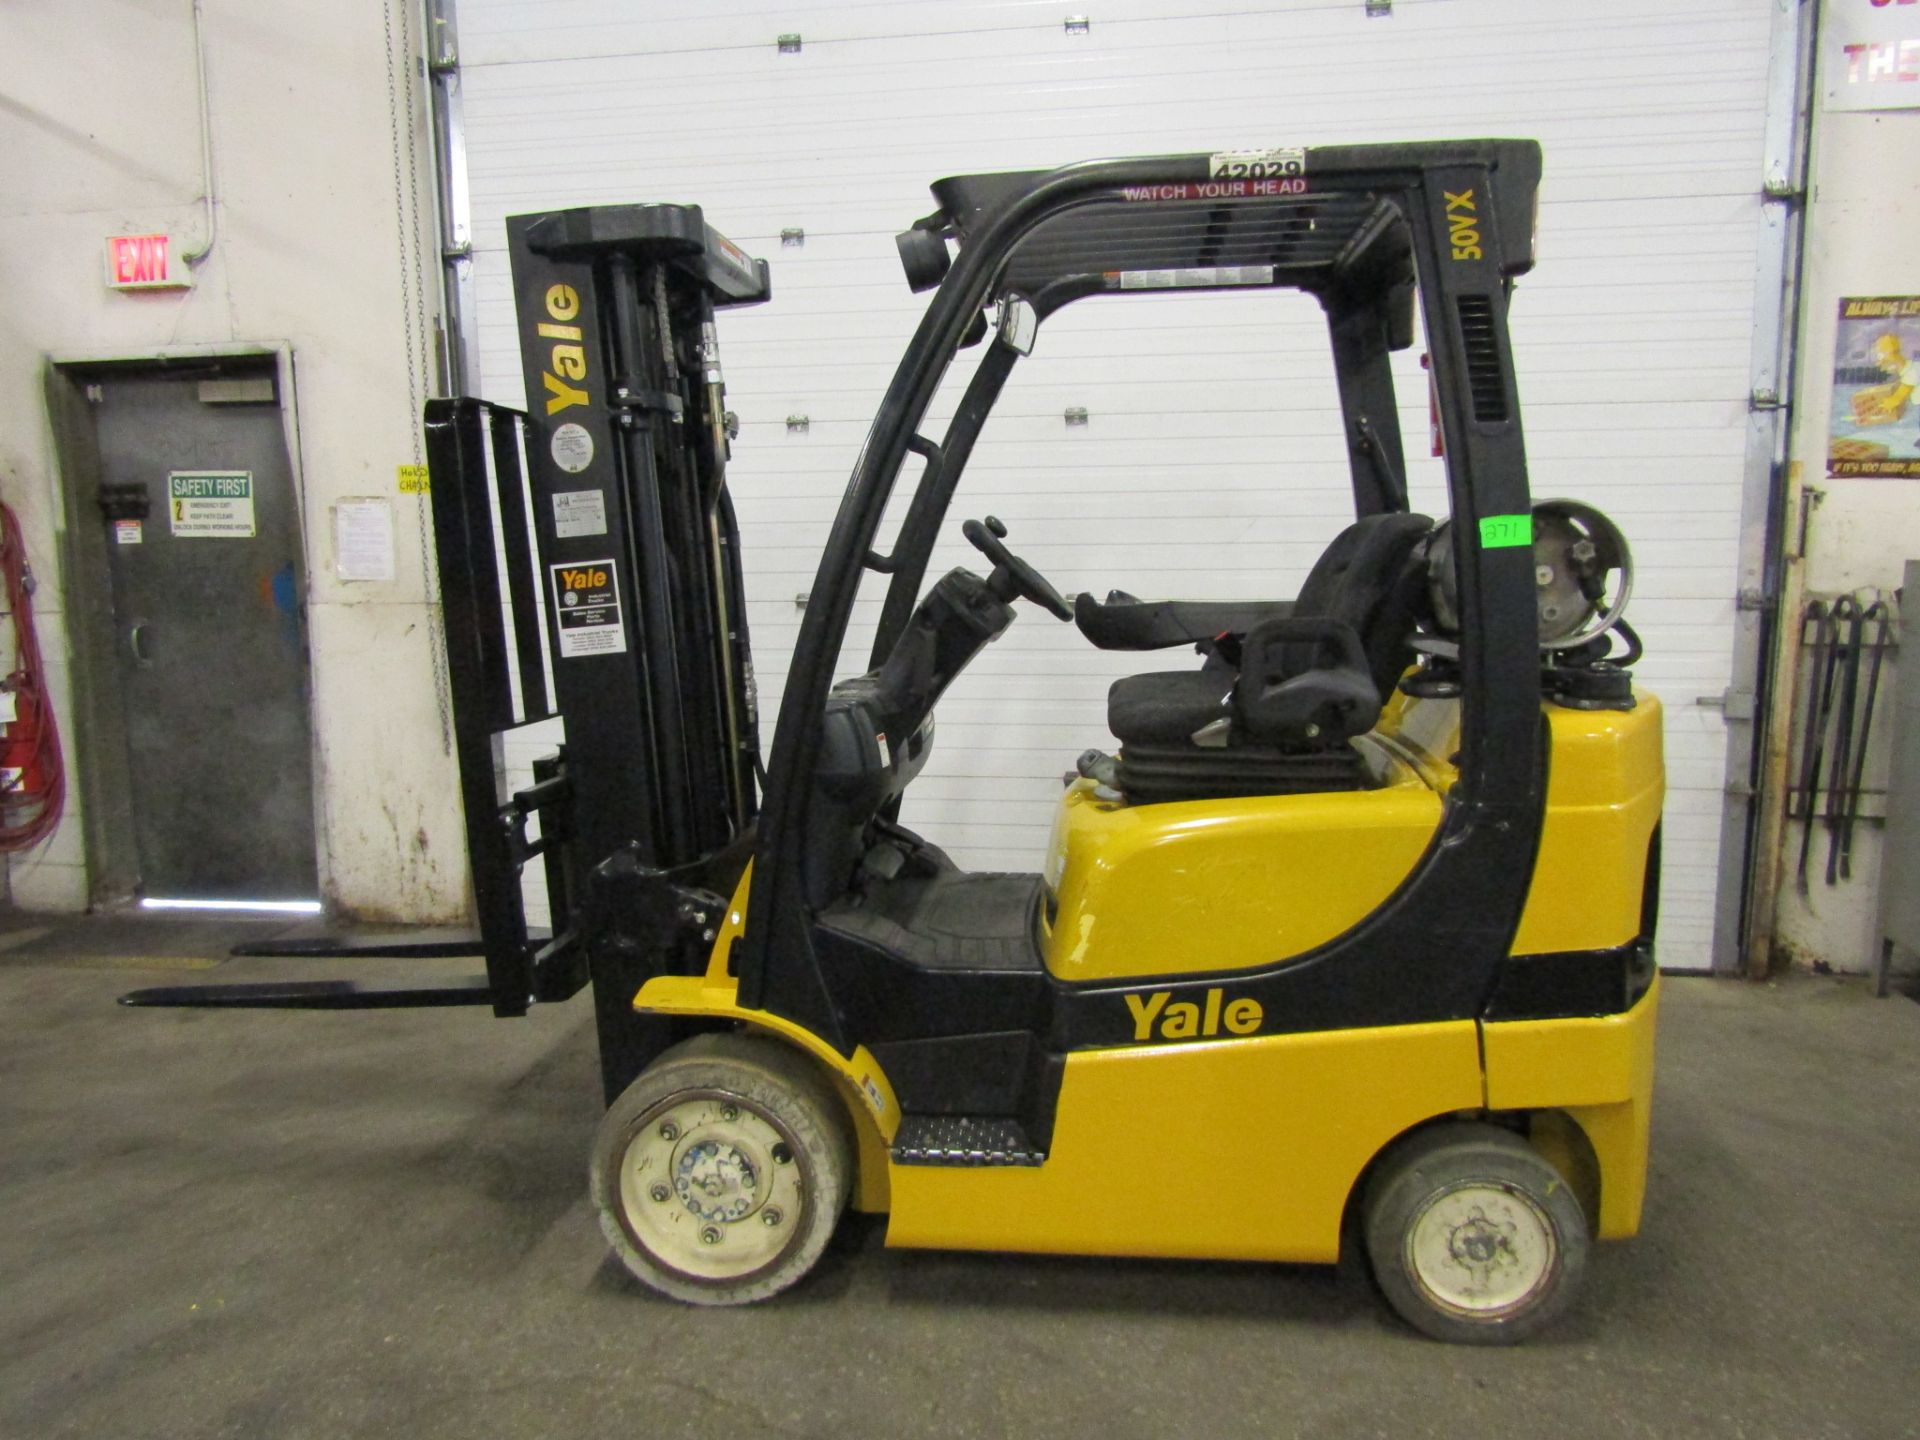 2013 Yale 5000lbs Capacity Forklift with 3-stage mast - LPG (propane) with sideshift (no propane